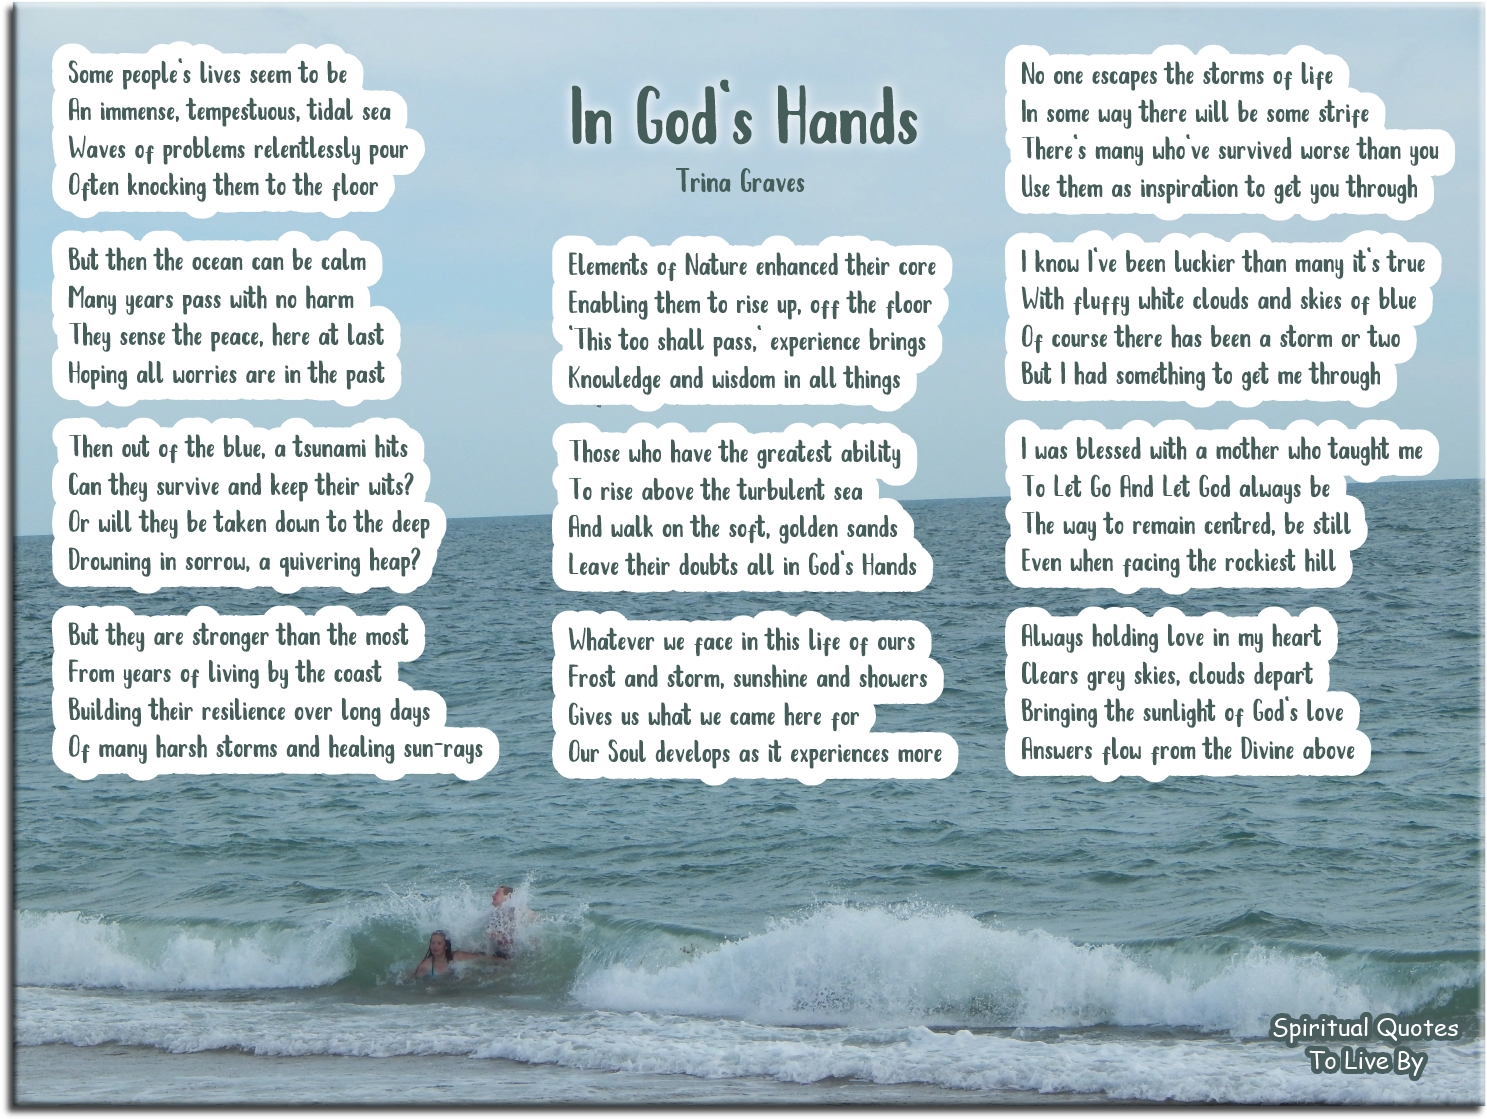 In God's Hands - inspirational poem by Trina Graves of Spiritual Quotes To Live By